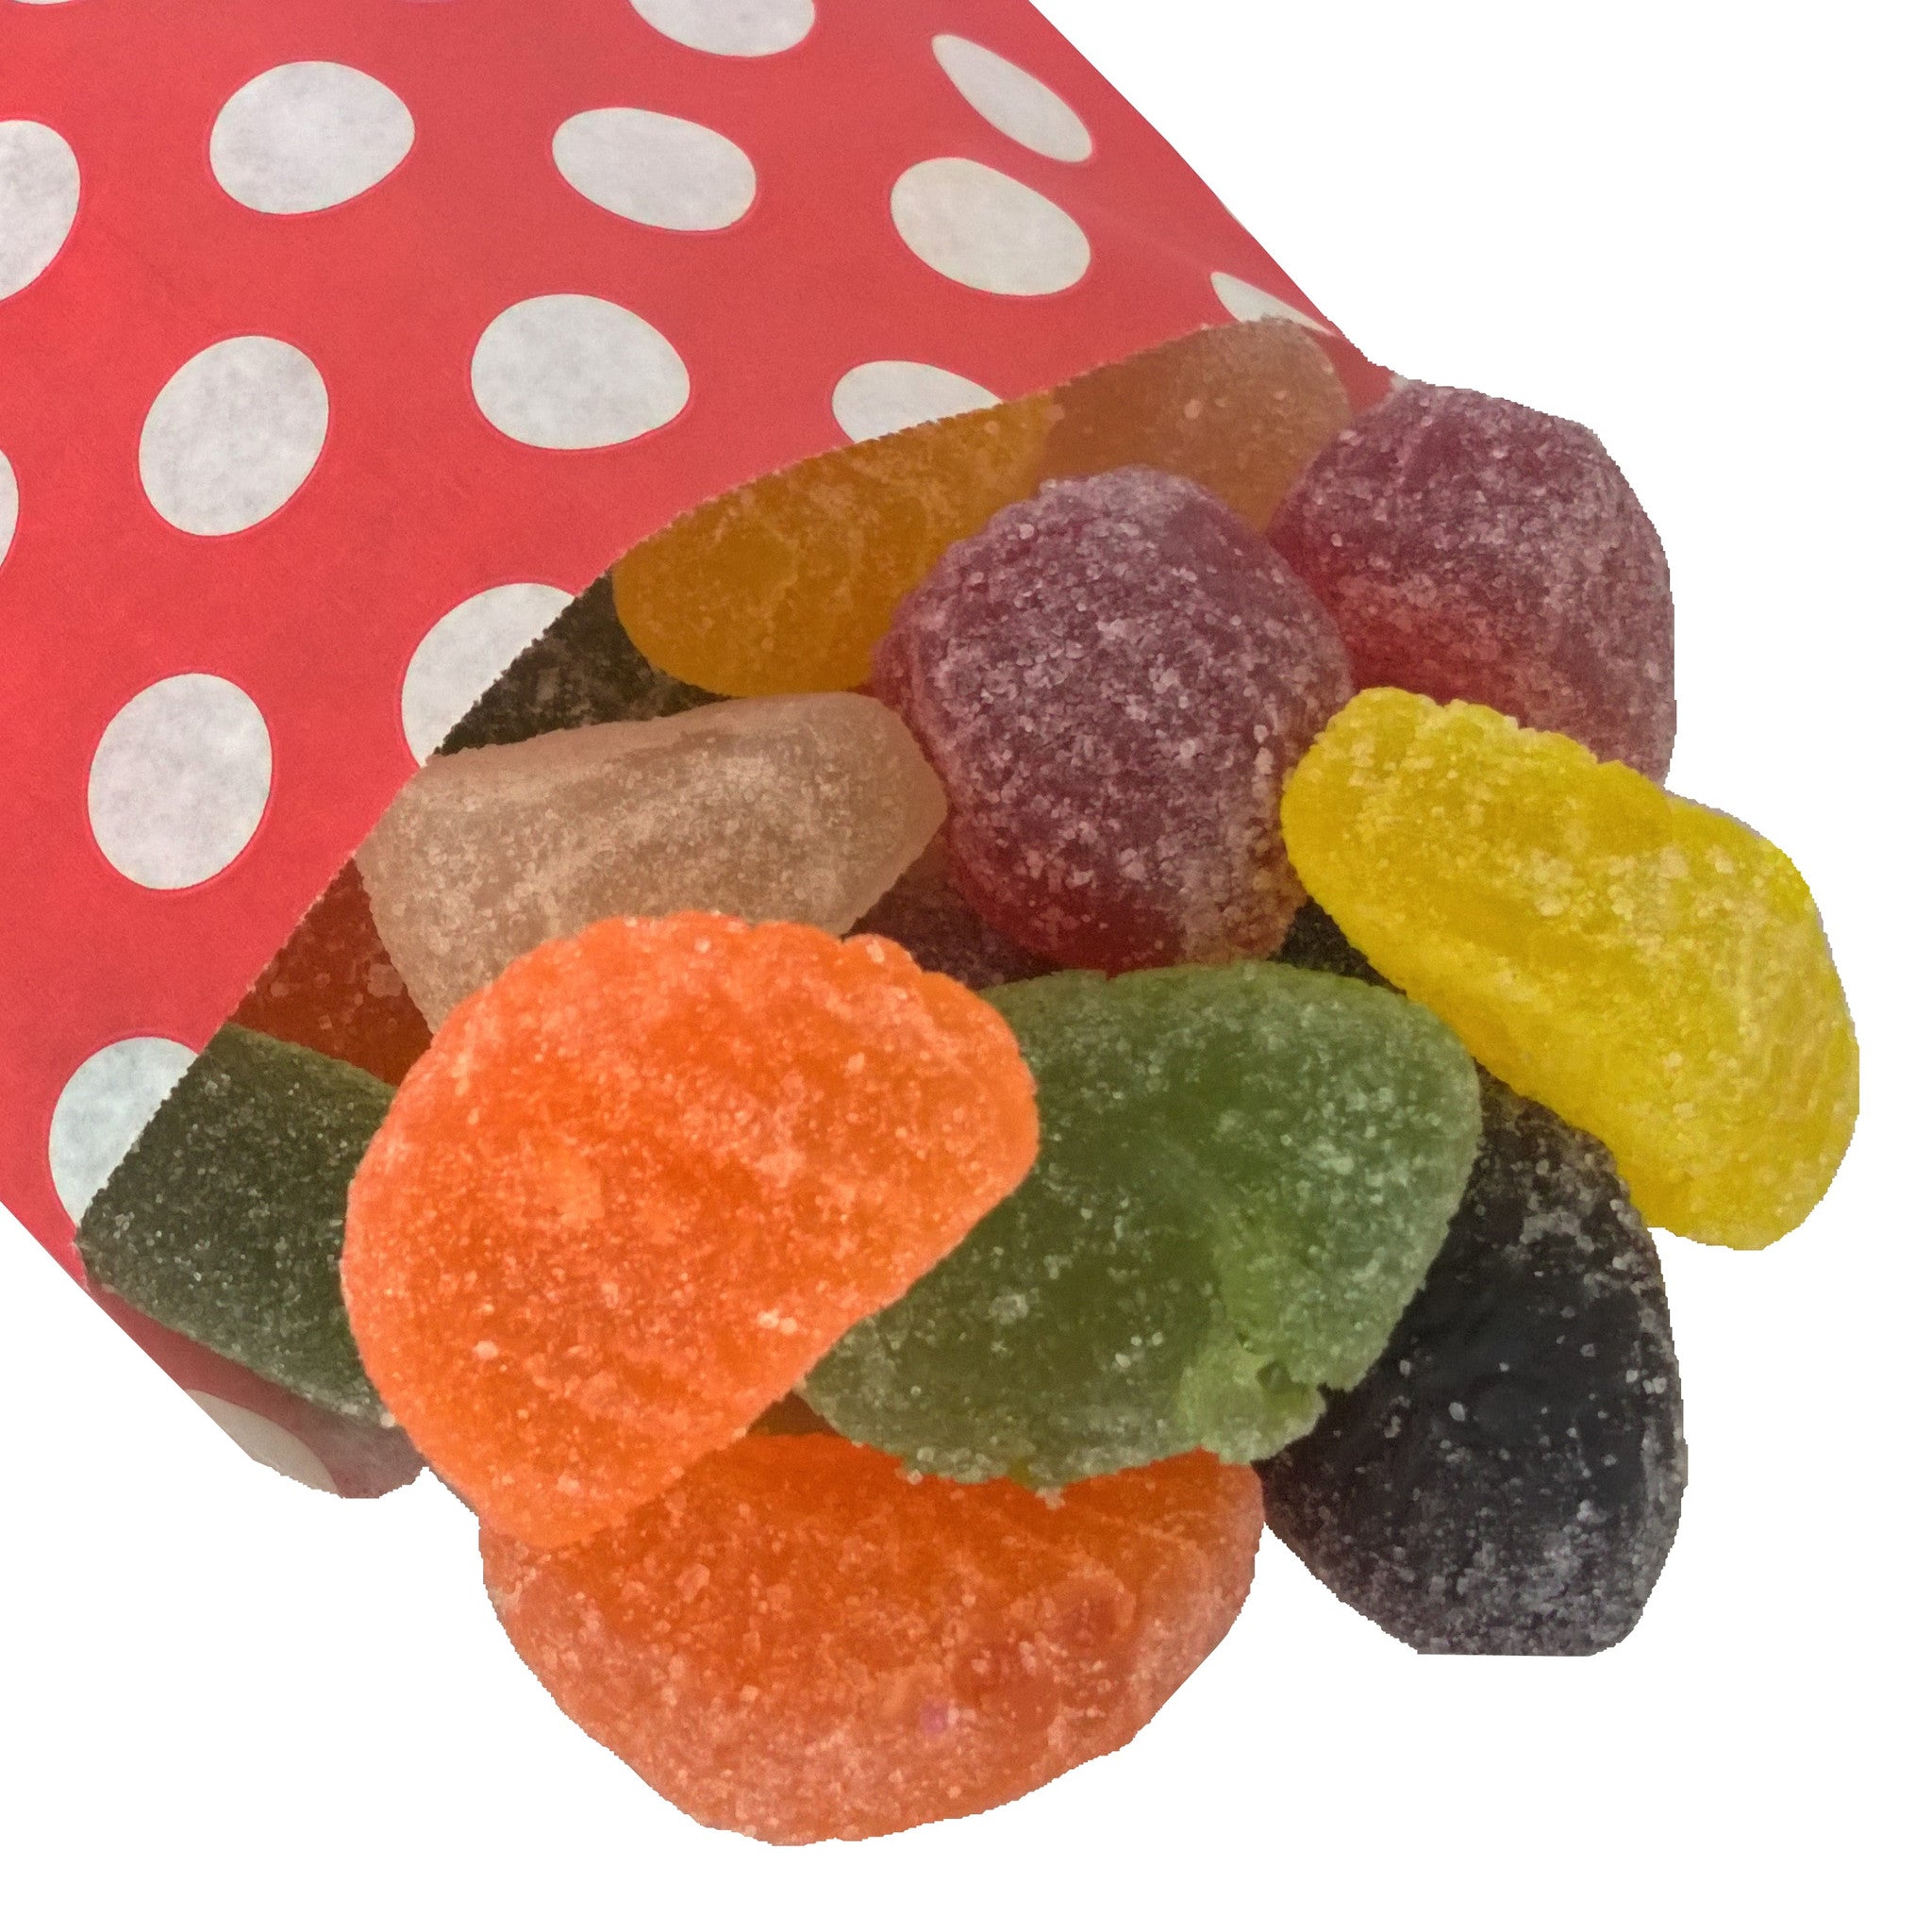 Fruit Jellies Yummy Vegetarian Sweets And Vegan Sweets Strawberry Laces